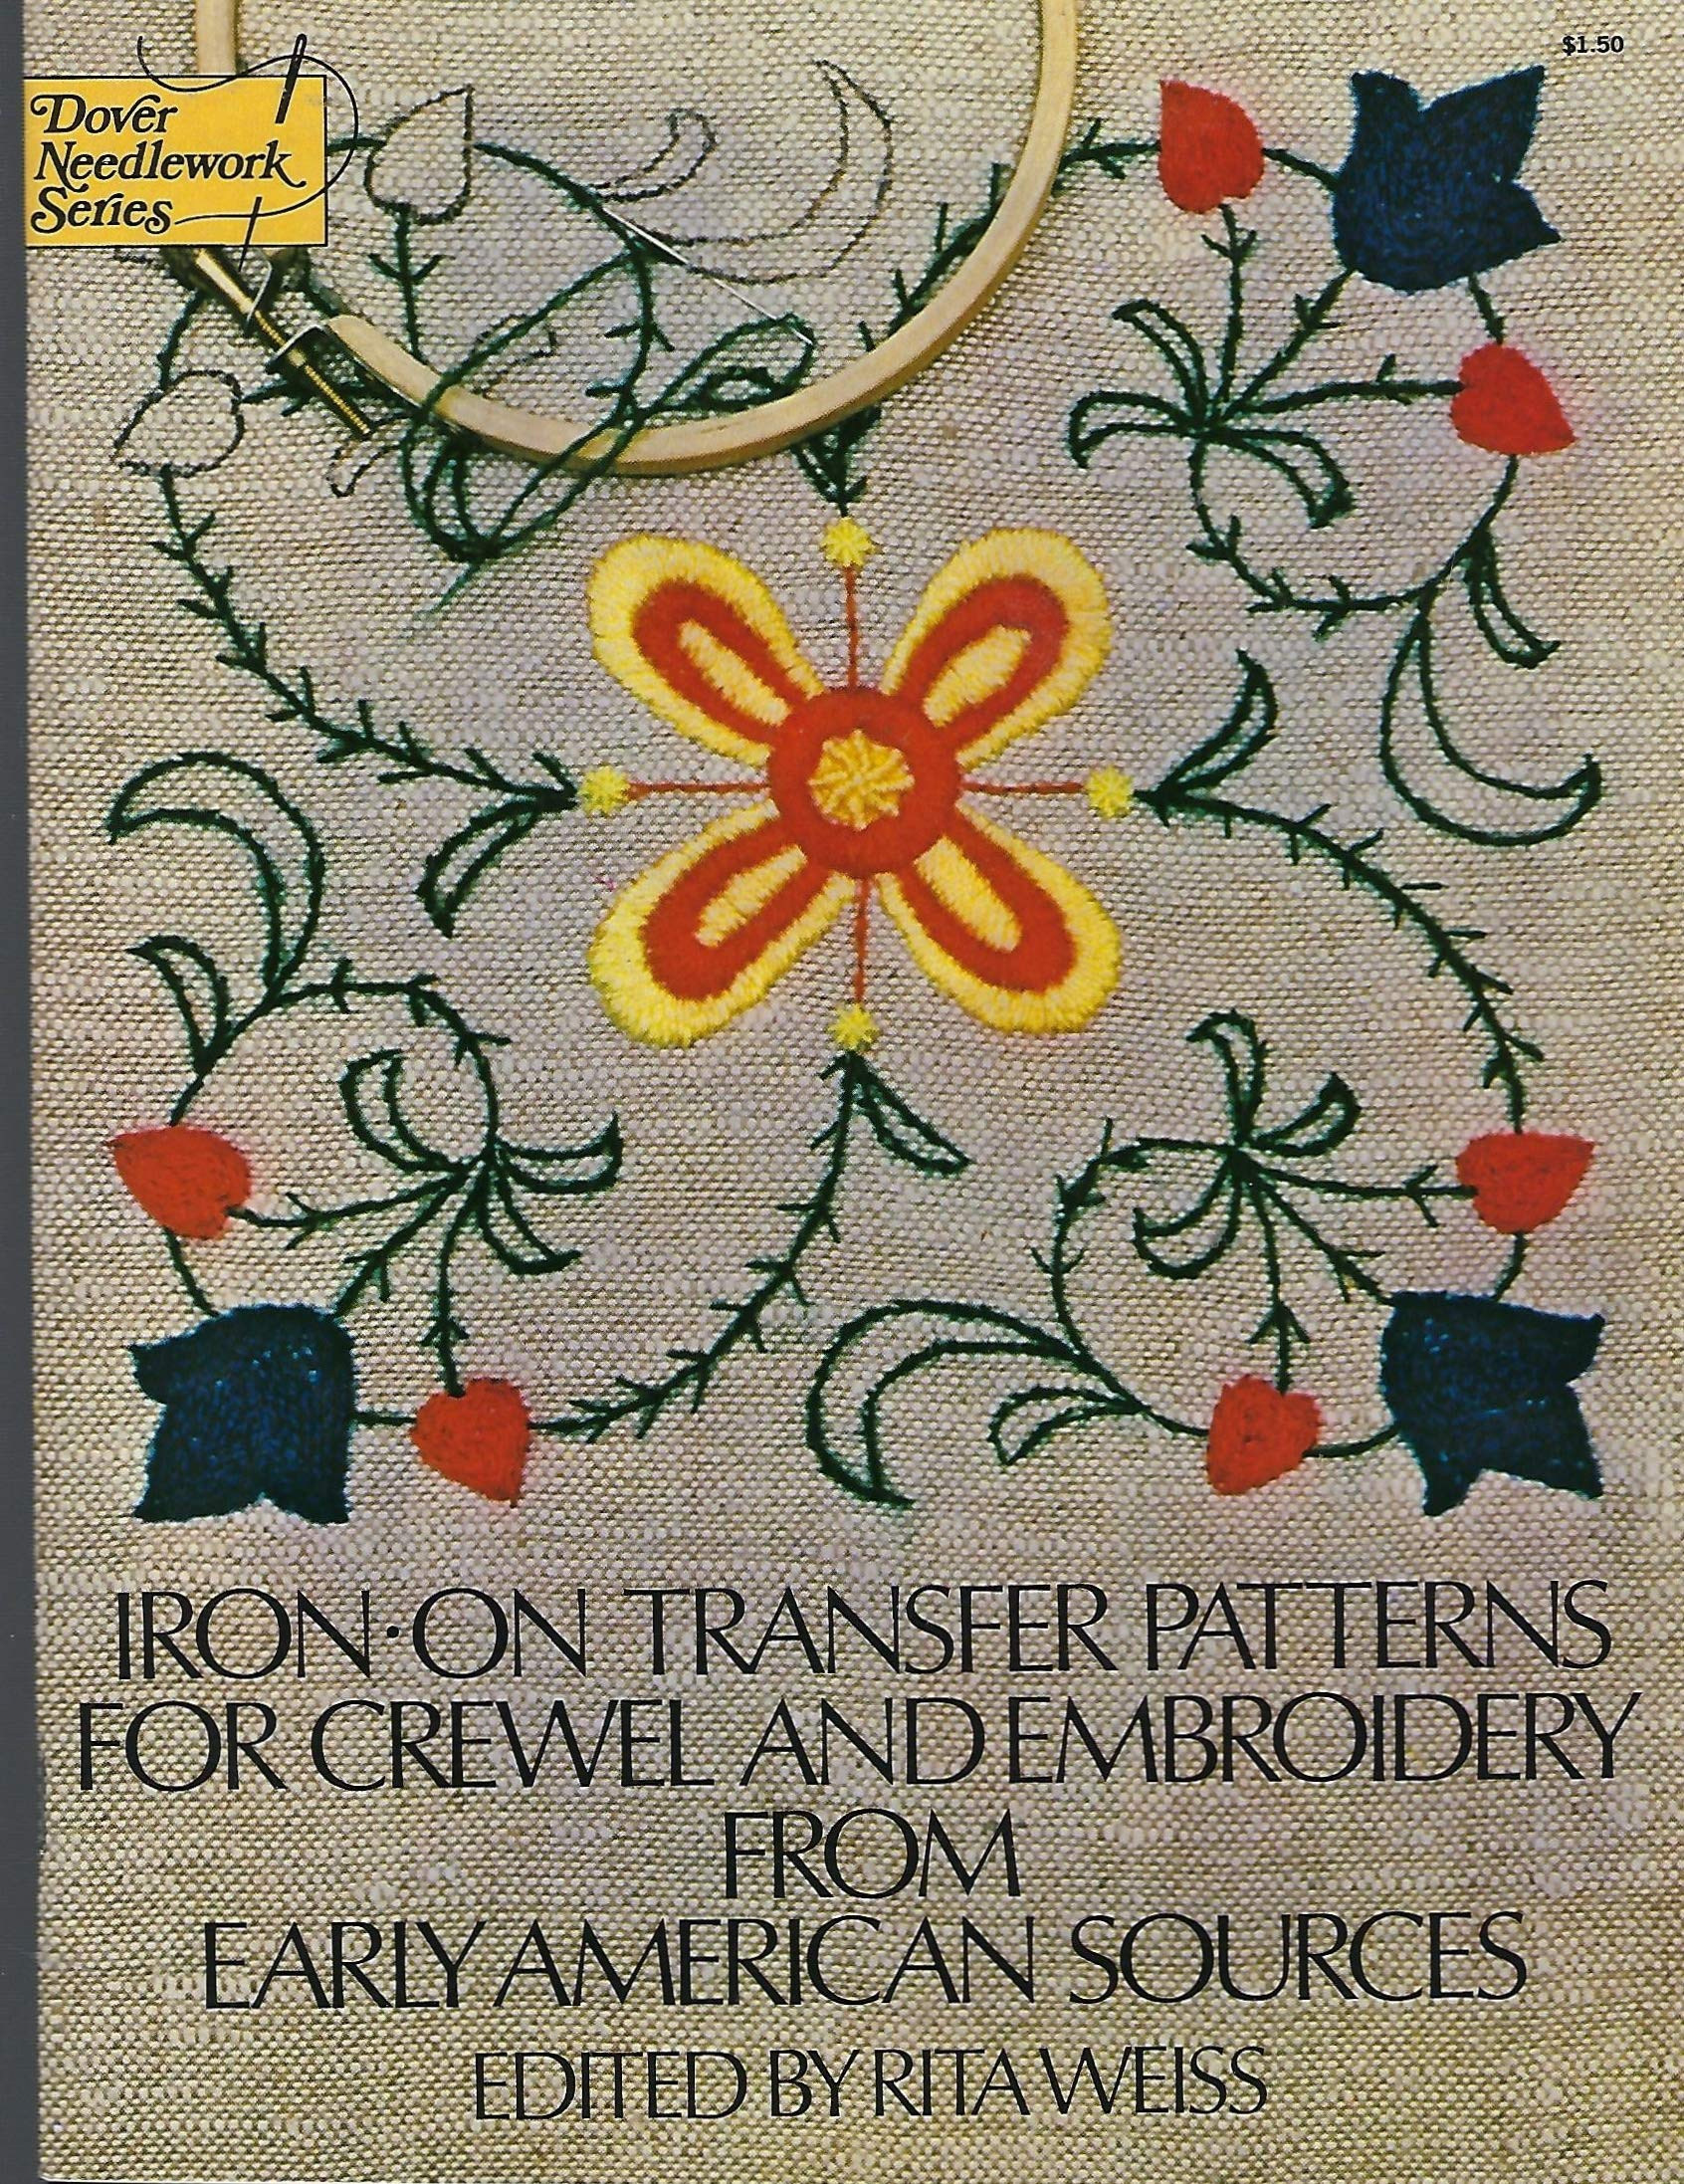 Crewel Embroidery Patterns Crewel Embroidery Patterns Embroidery Origami